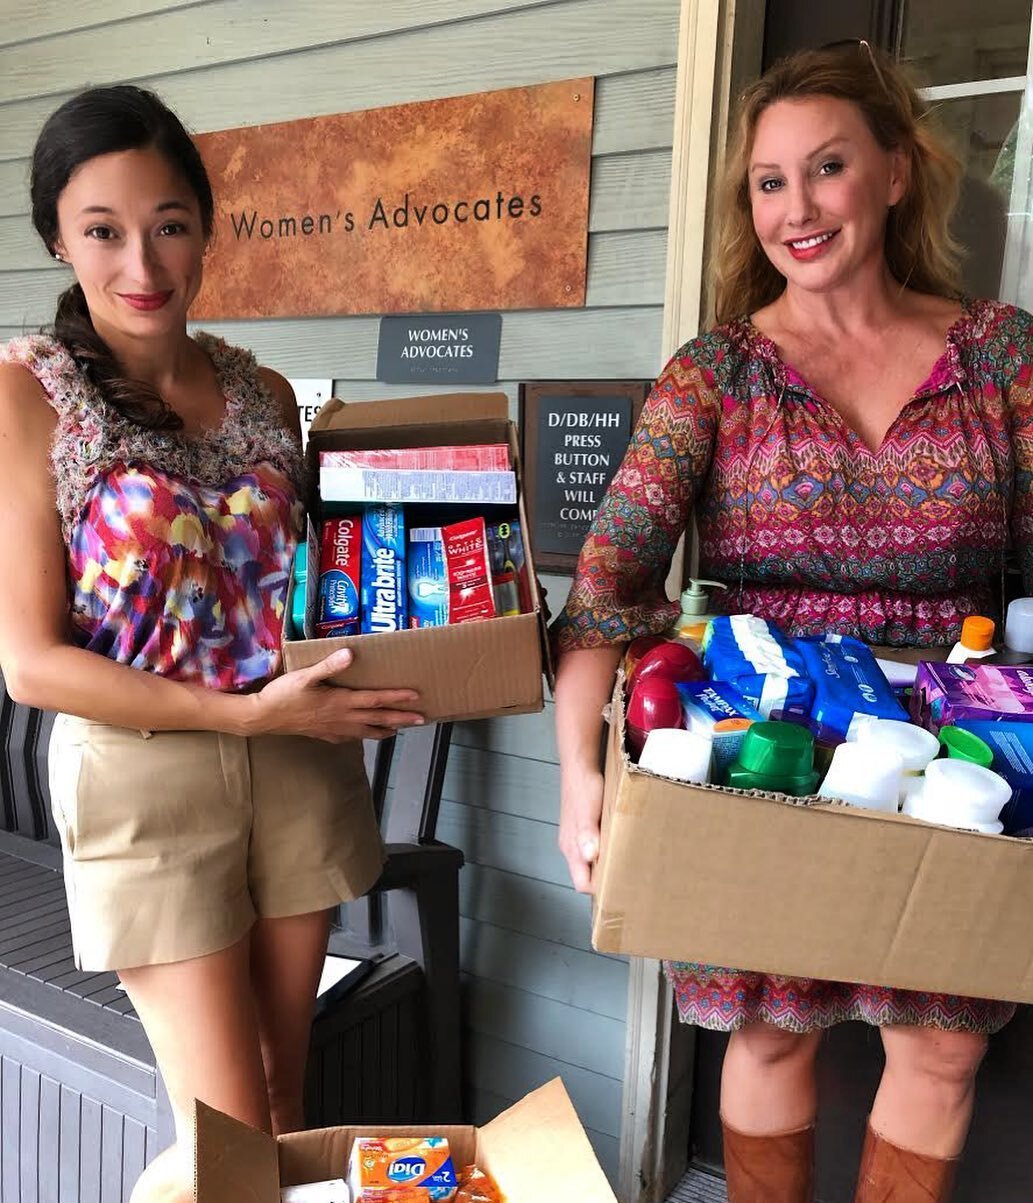 &ldquo;HUSTLE. HELP. REPEAT.&rdquo; That&rsquo;s our formula for providing support to DV survivors in emergency abuse shelters. With your help, we&rsquo;ve been able to do precisely that, making drops of personal care items as our shelters need them.